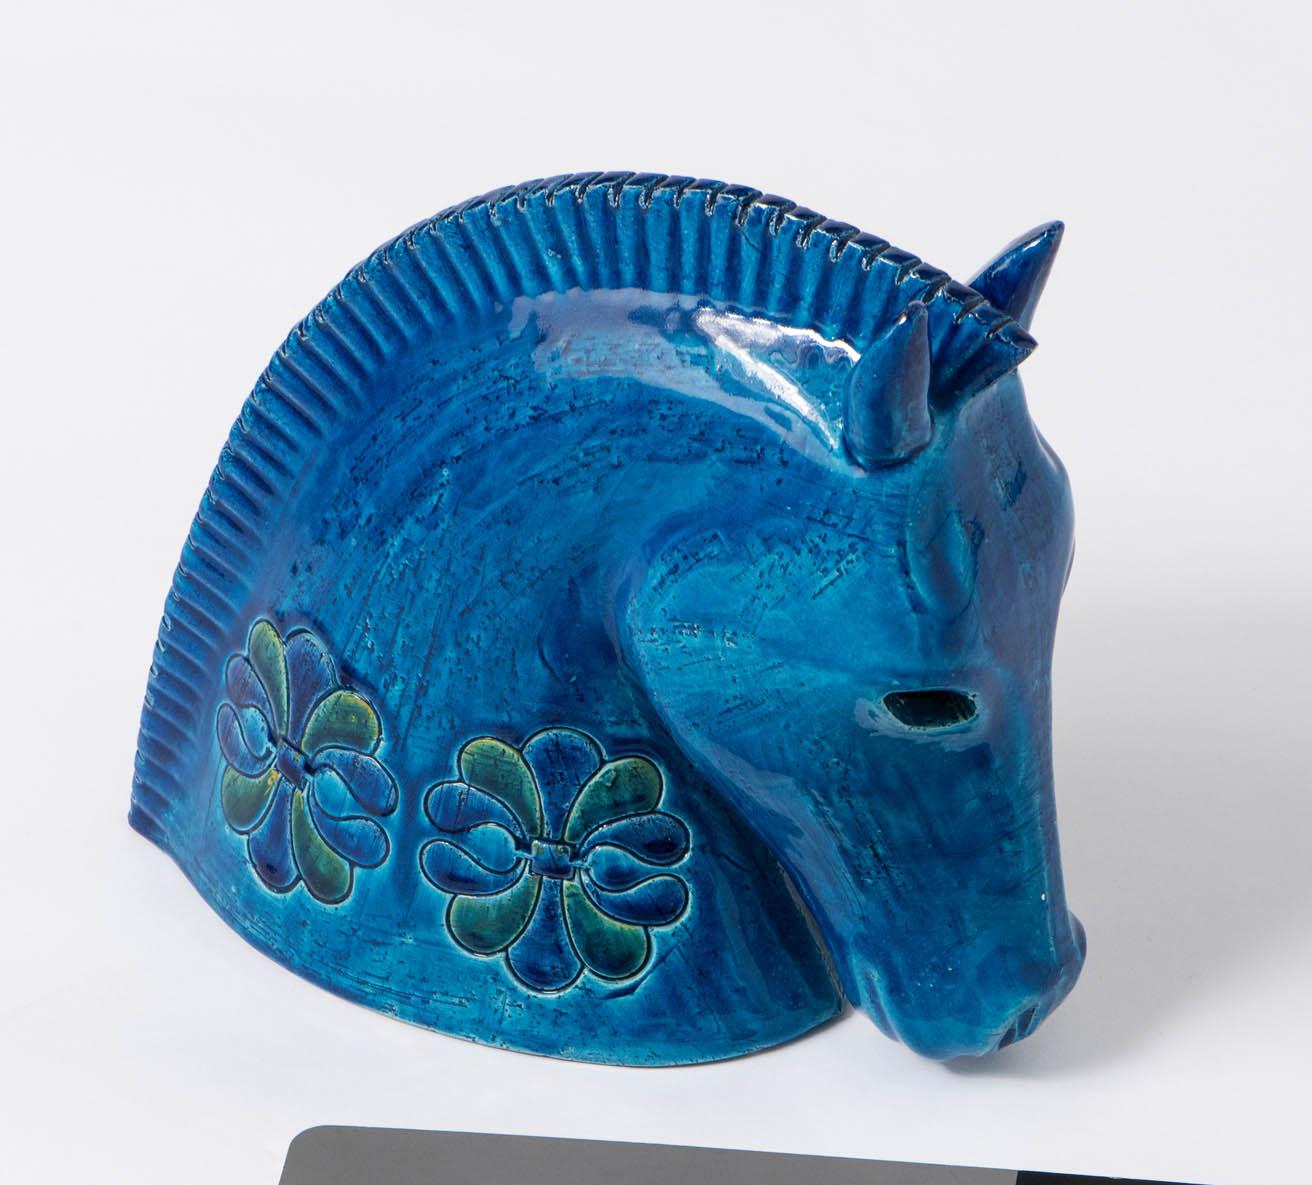 A large ceramic sculpture of a Horse’s Head by Aldo Londi for Bitossi.
“Rimini blue” glaze
With impressed stylized decoration.
Italy,
circa 1950.
Measures: 25 cm high x 27 cm deep x 10 cm wide.
 